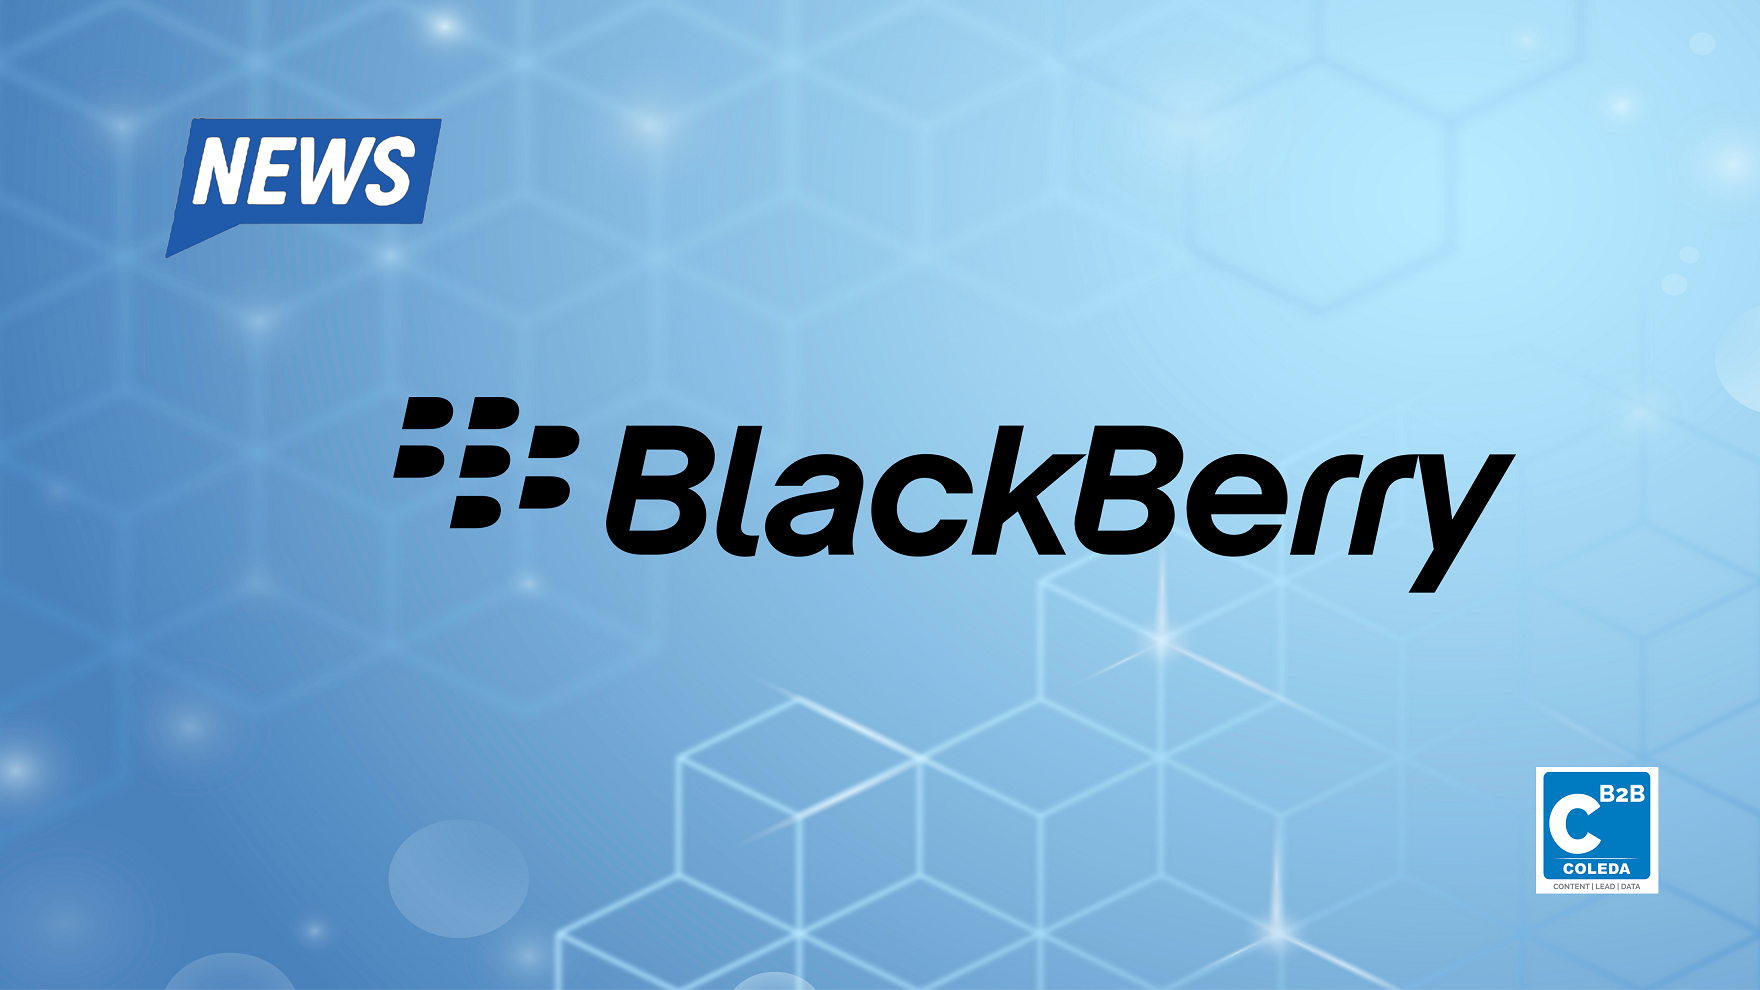 BlackBerry Announces Fresh Patent Selling Deal for Up to $900 Million